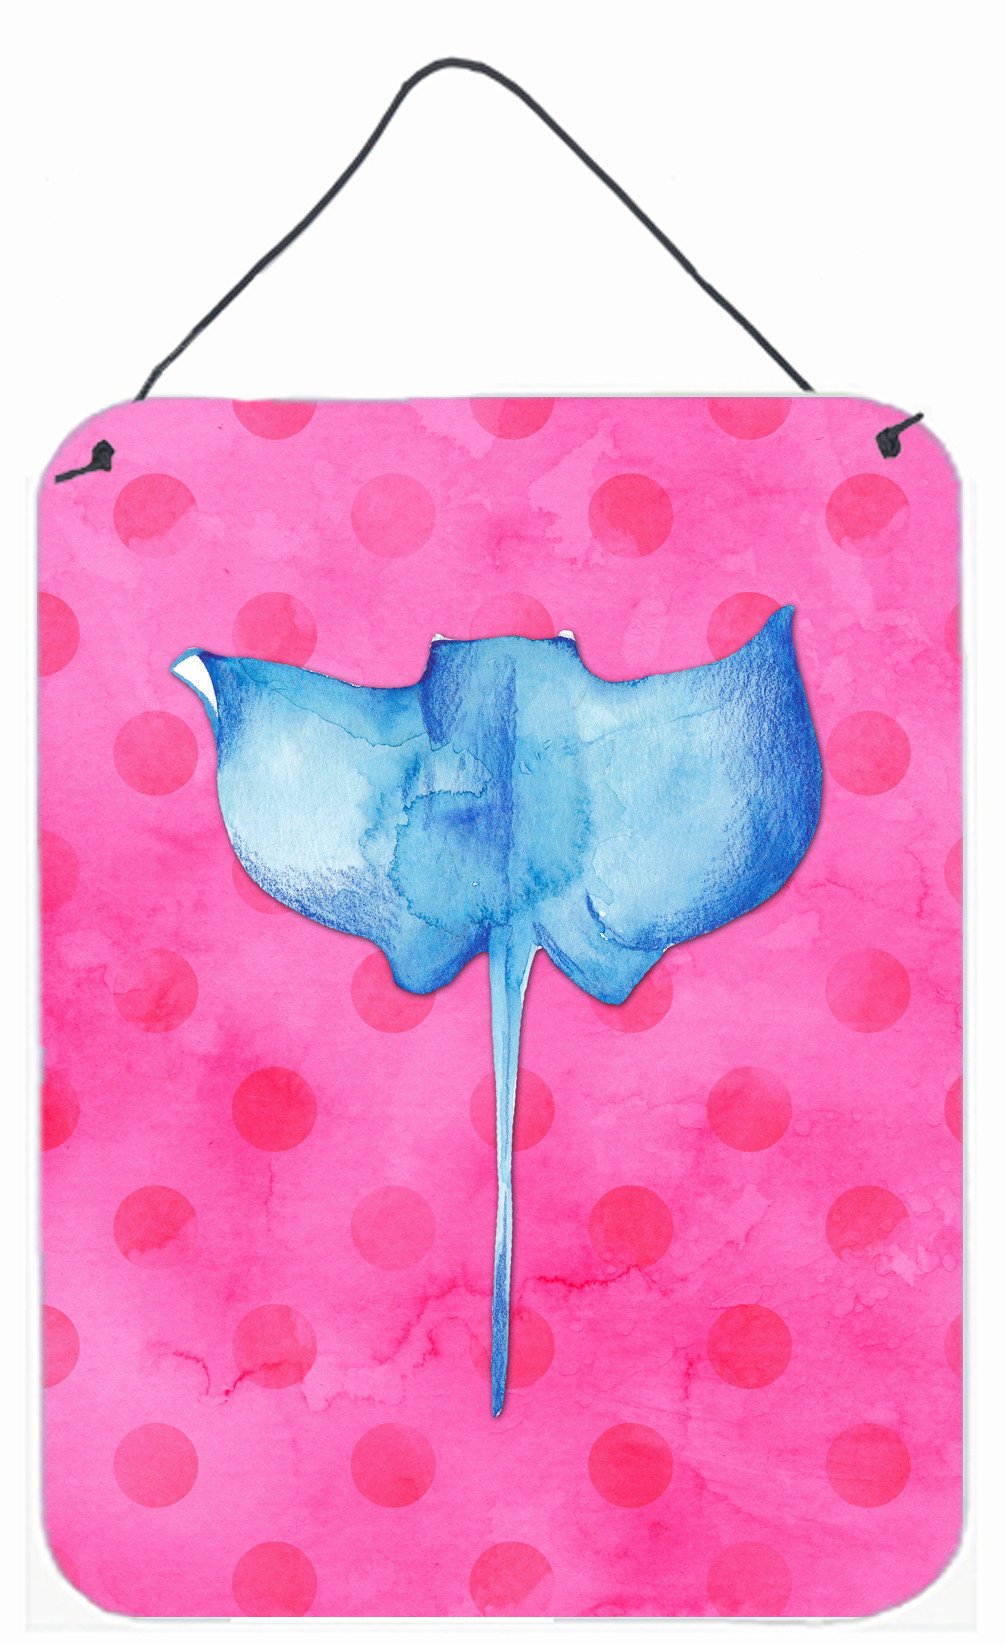 Sting Ray Pink Polkadot Wall or Door Hanging Prints BB8239DS1216 by Caroline's Treasures